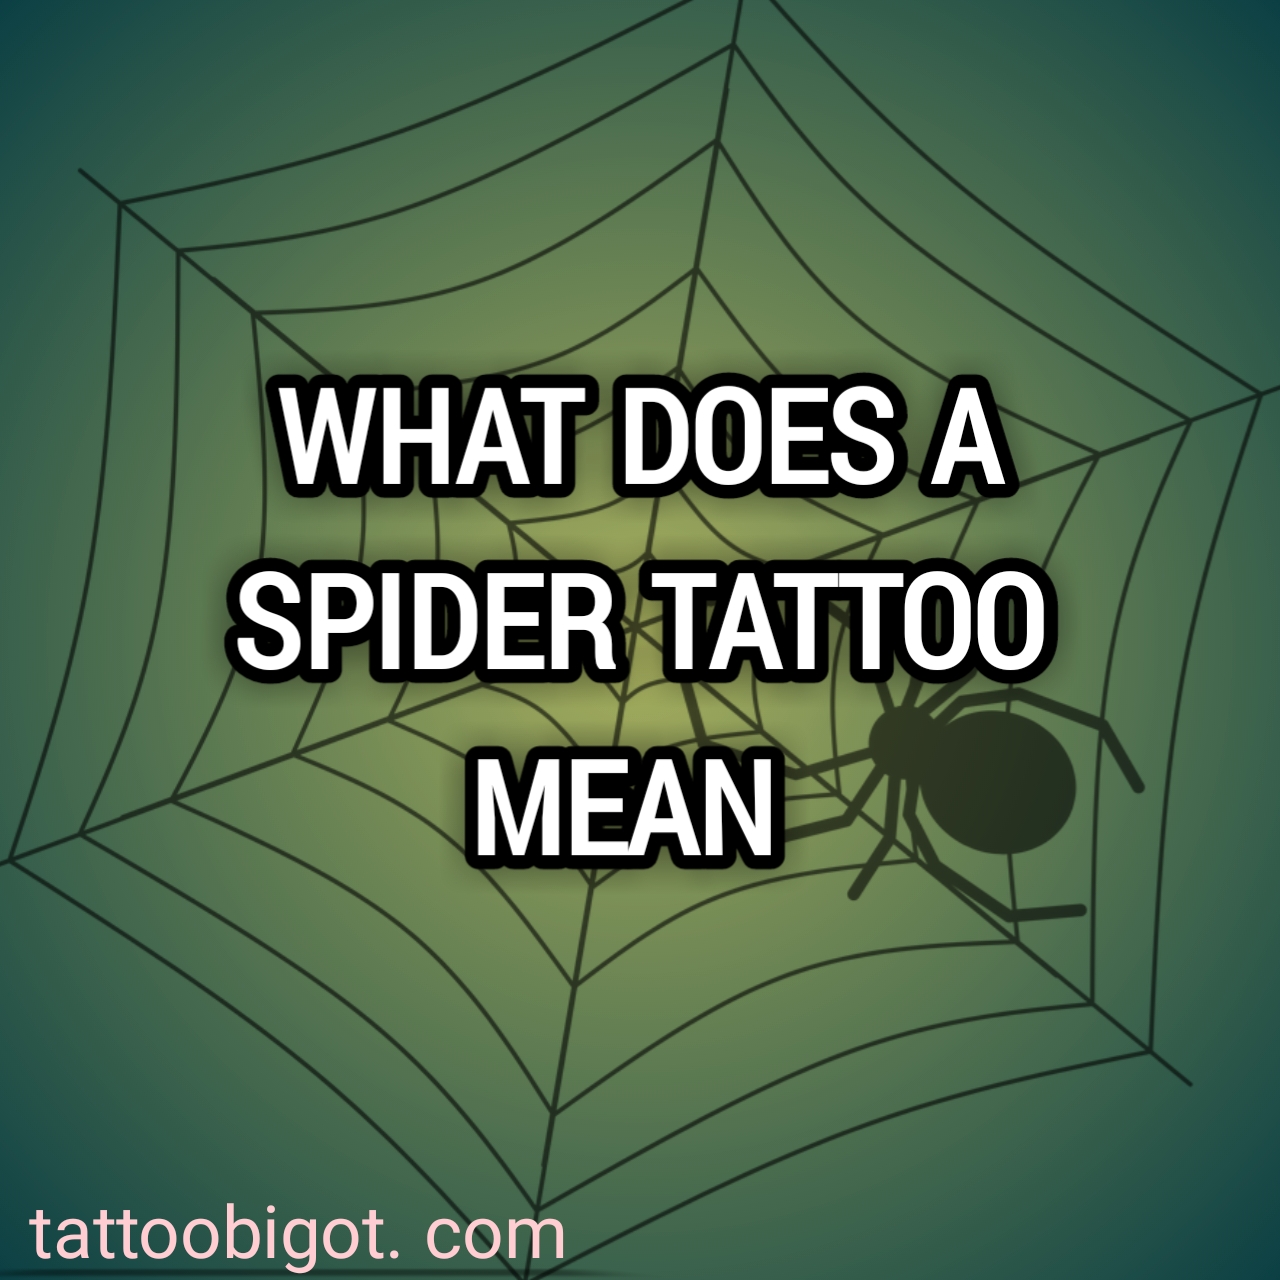 What does a spider tattoo mean